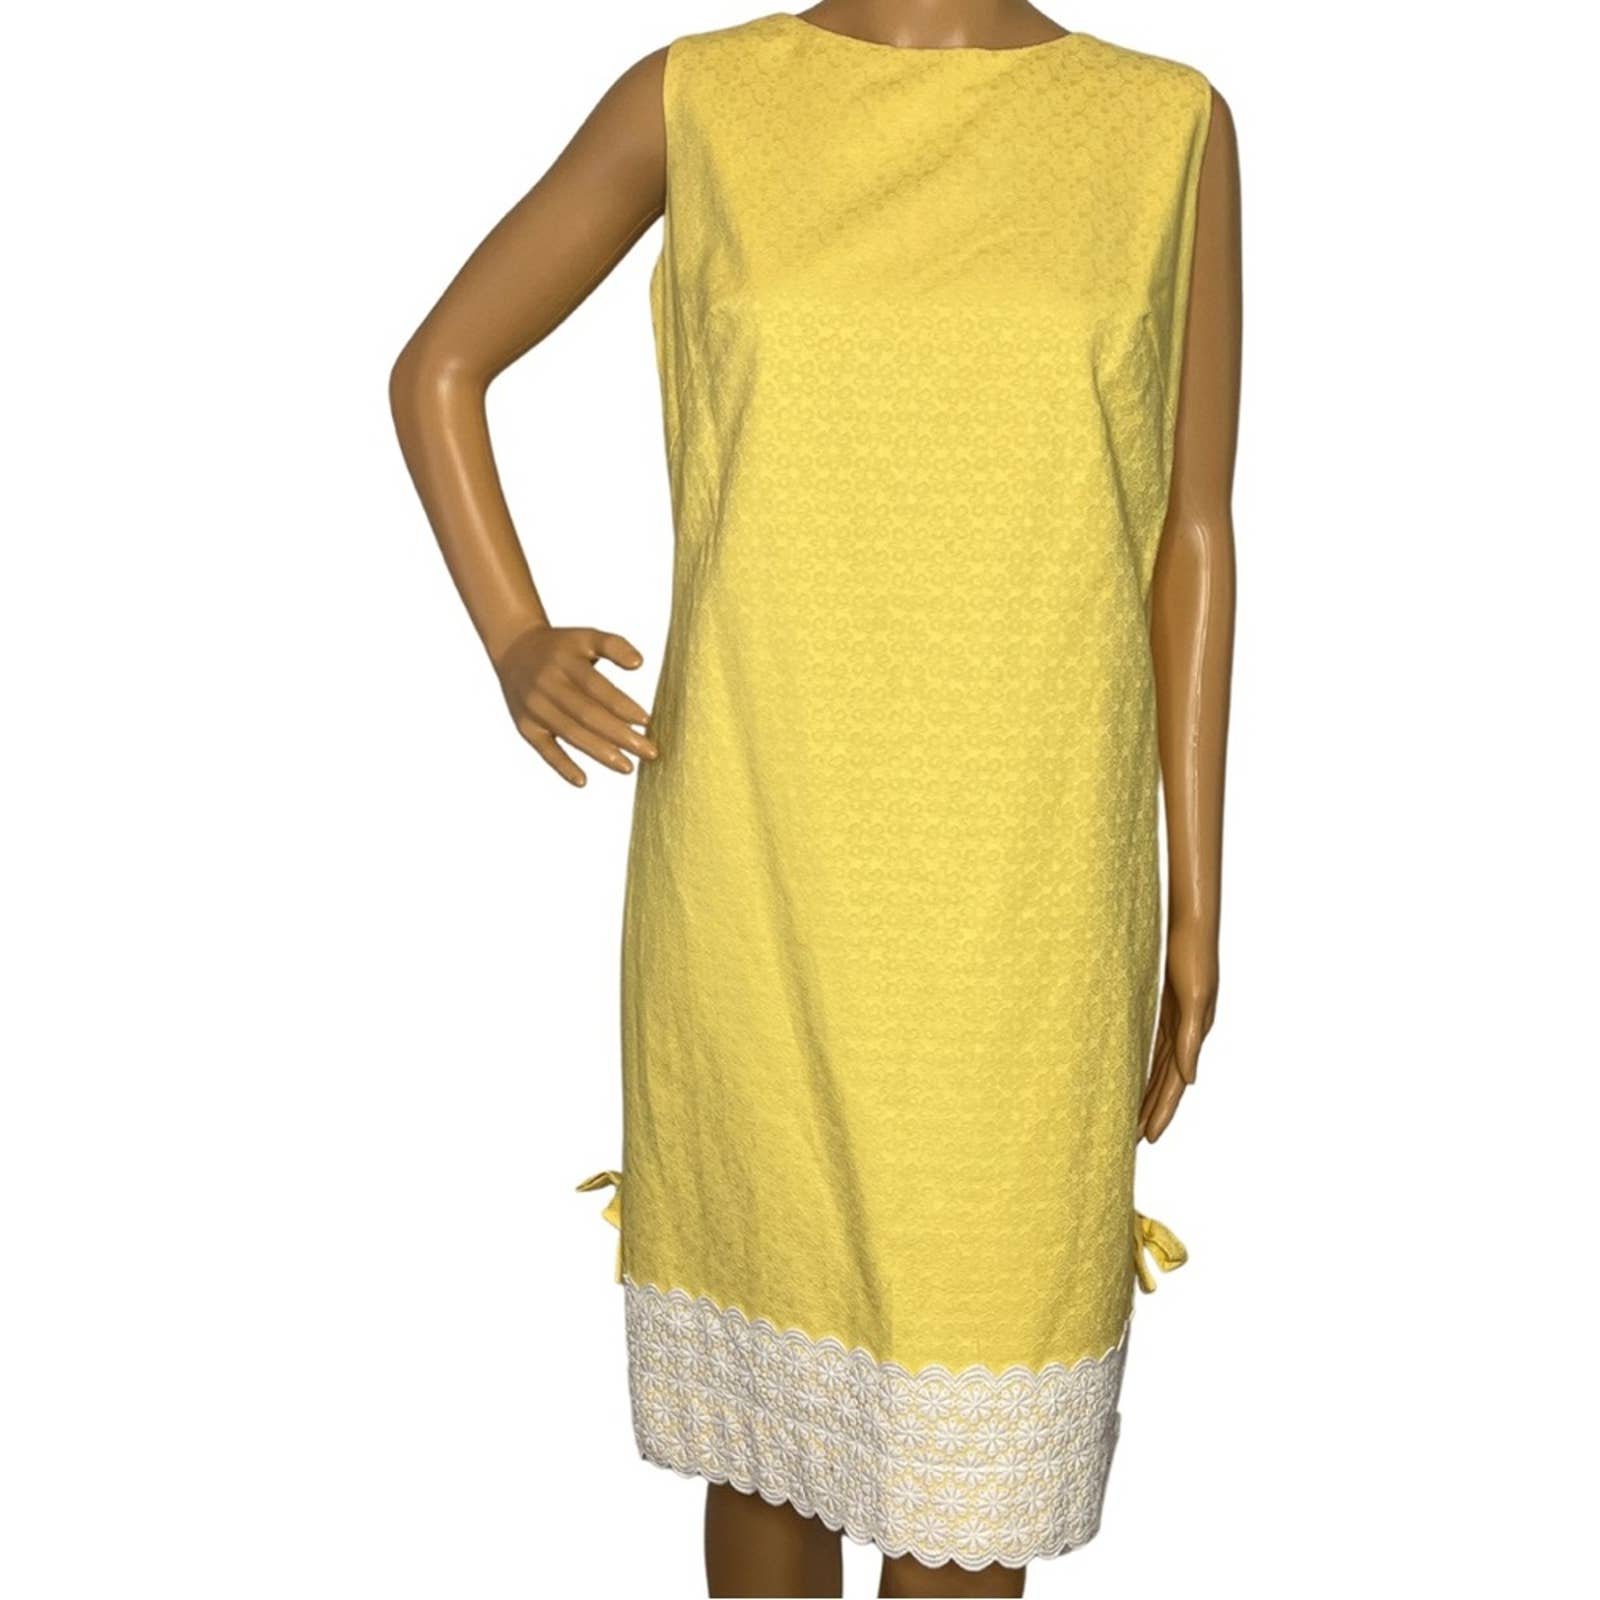 Personality Lilly Pulitzer Yellow Shift Dress with Whit